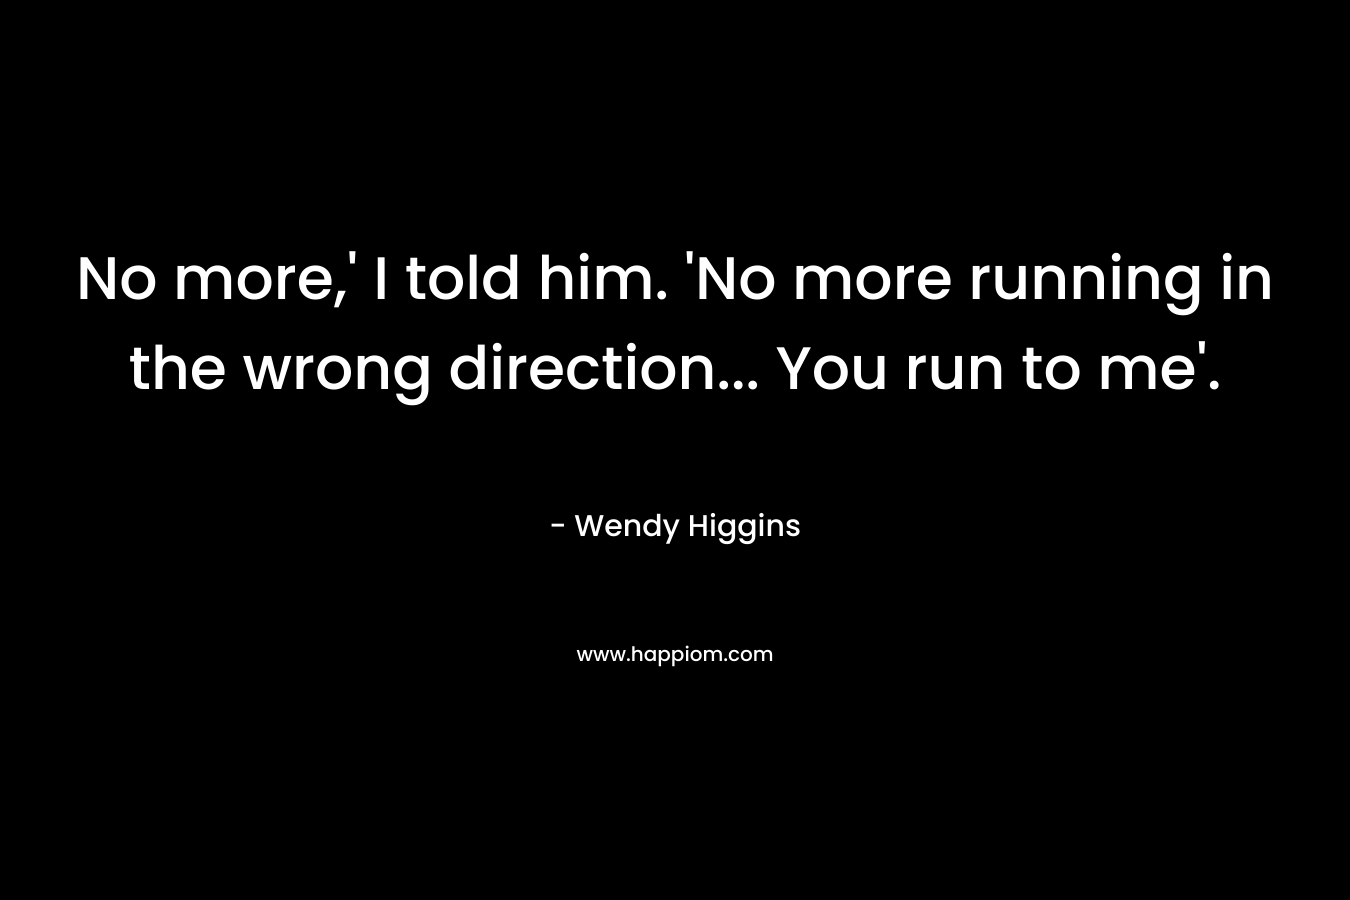 No more,' I told him. 'No more running in the wrong direction... You run to me'.